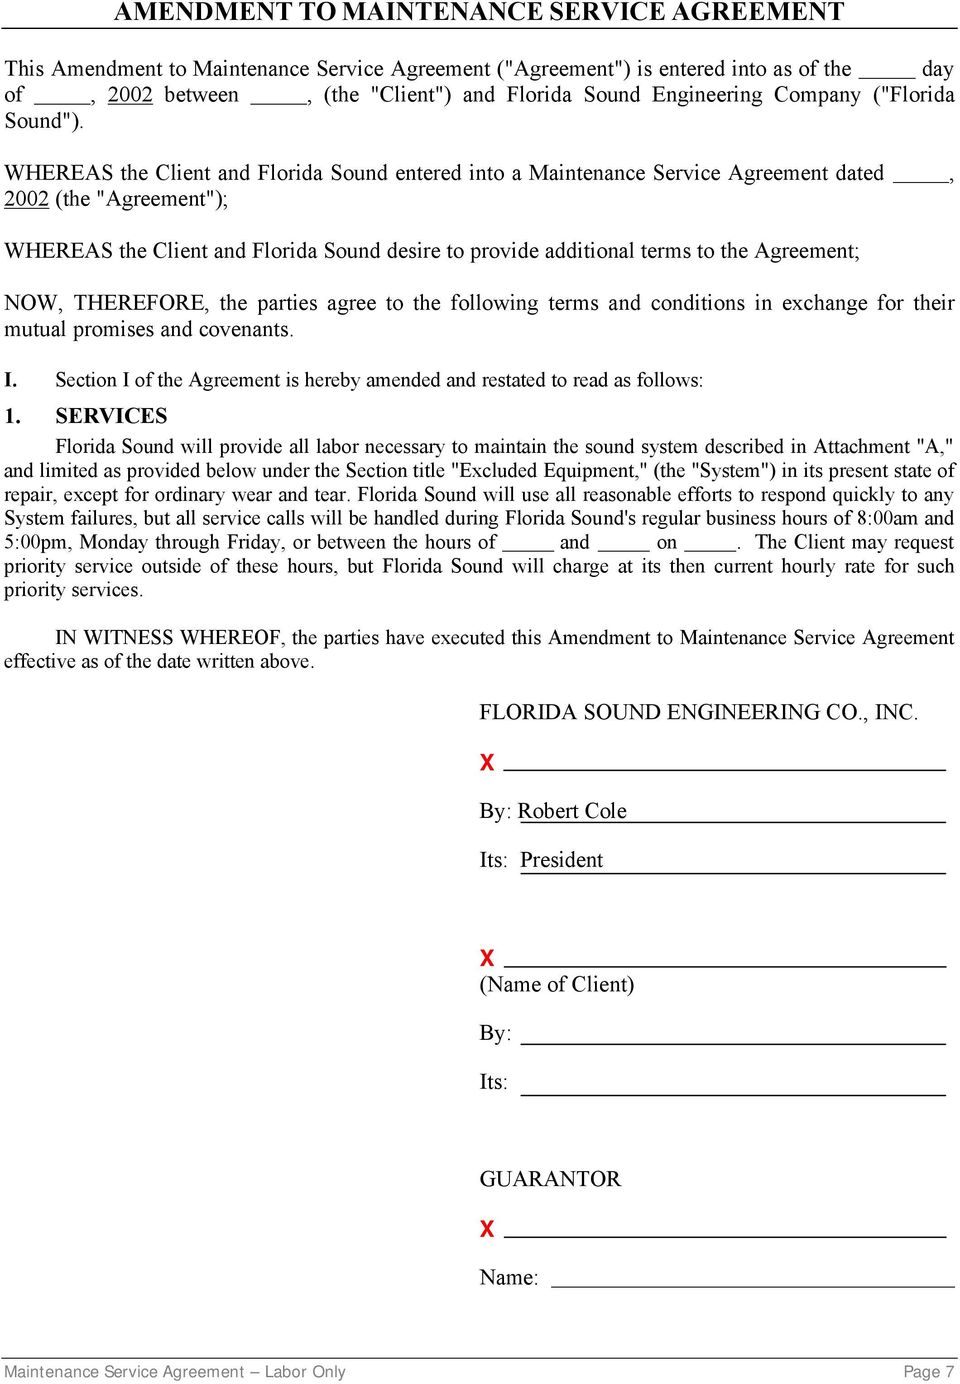 WHEREAS the Client and Florida Sound entered into a Maintenance Service Agreement dated, 2002 (the "Agreement"); WHEREAS the Client and Florida Sound desire to provide additional terms to the